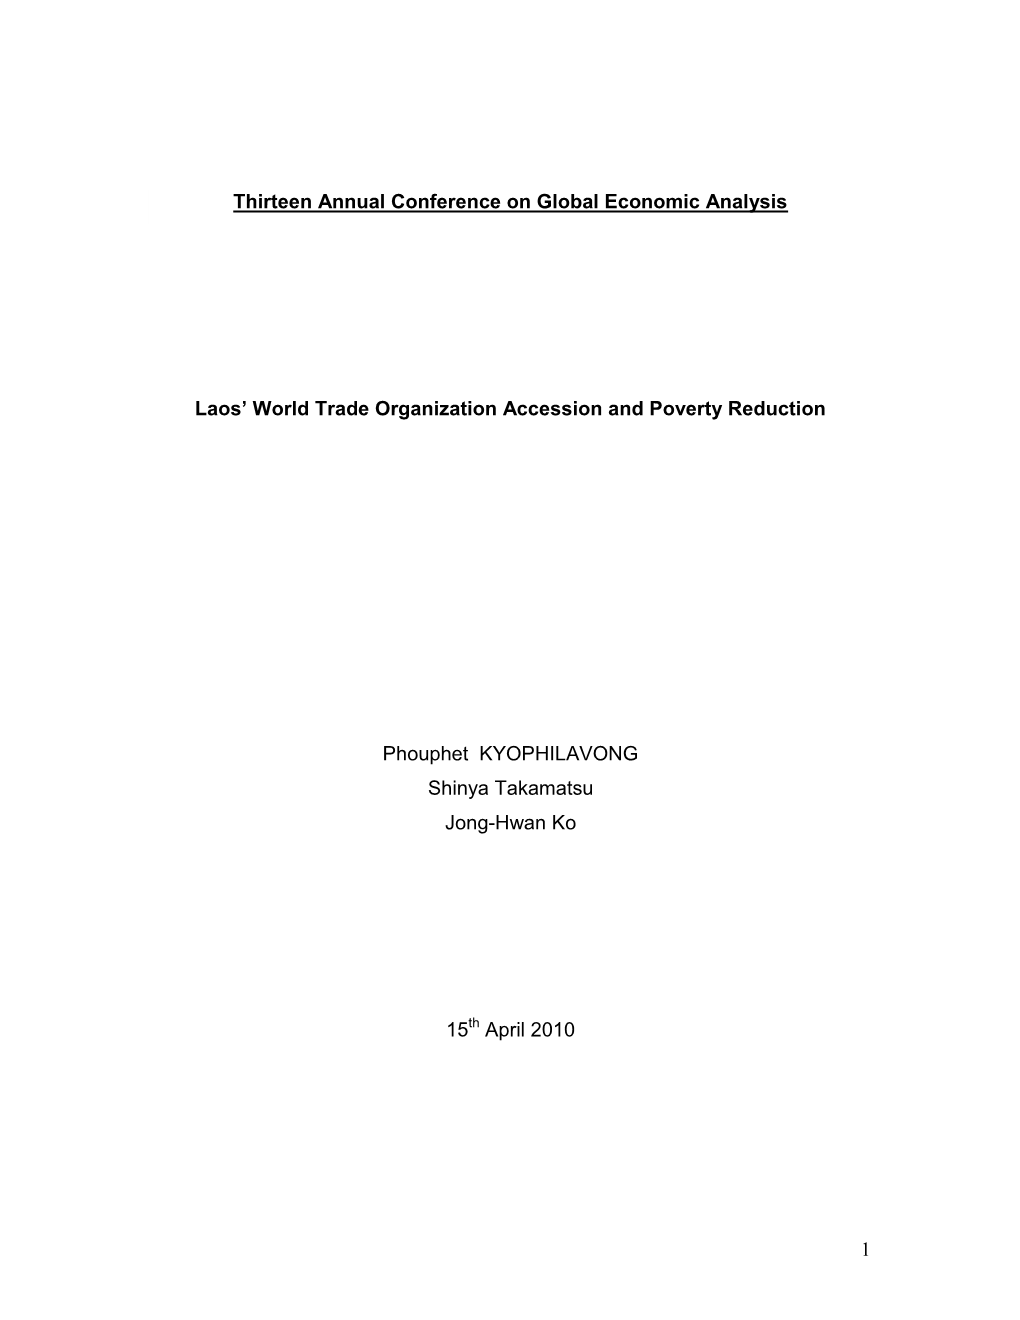 Impact of Laos's Accession to the World Trade Organization